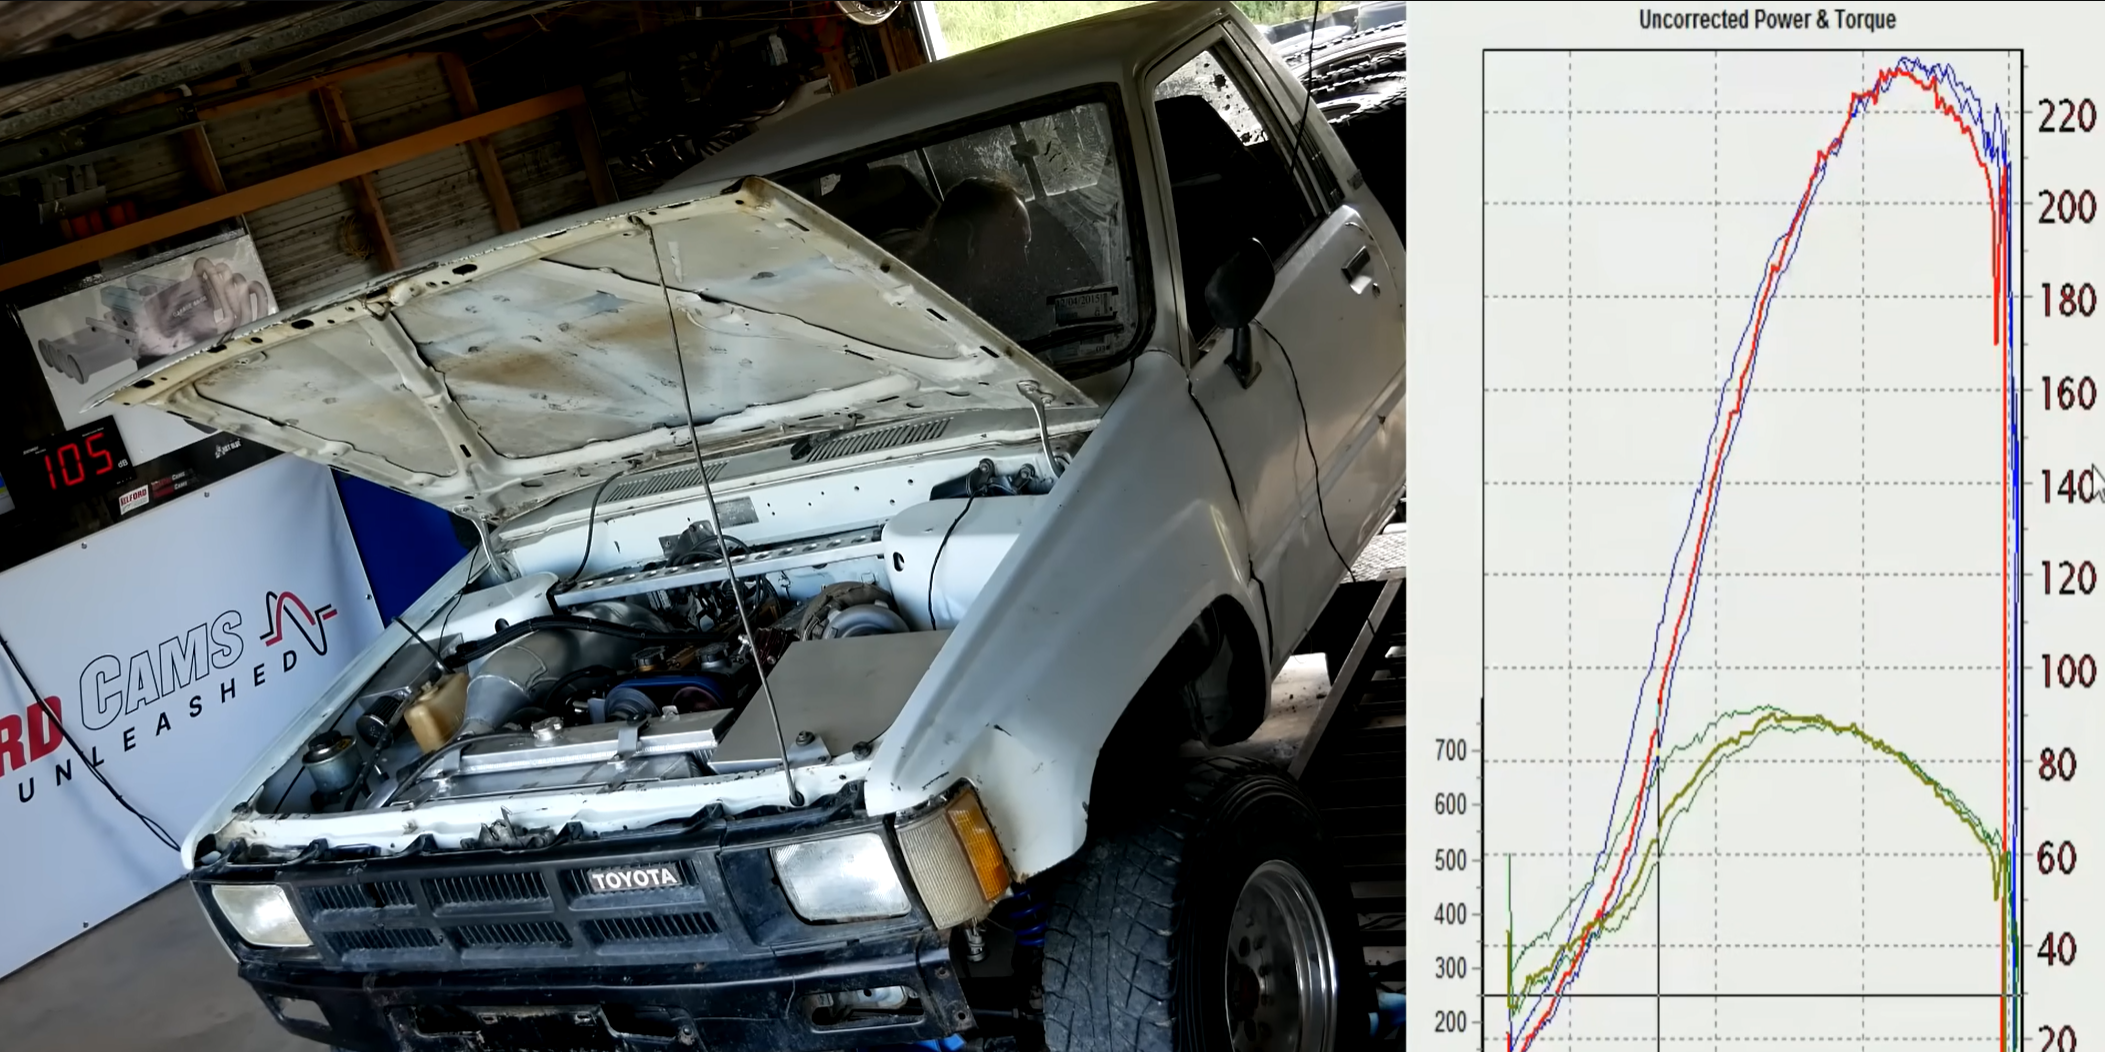 This 4AGE-Powered Hilux Revs to 10,000 RPM